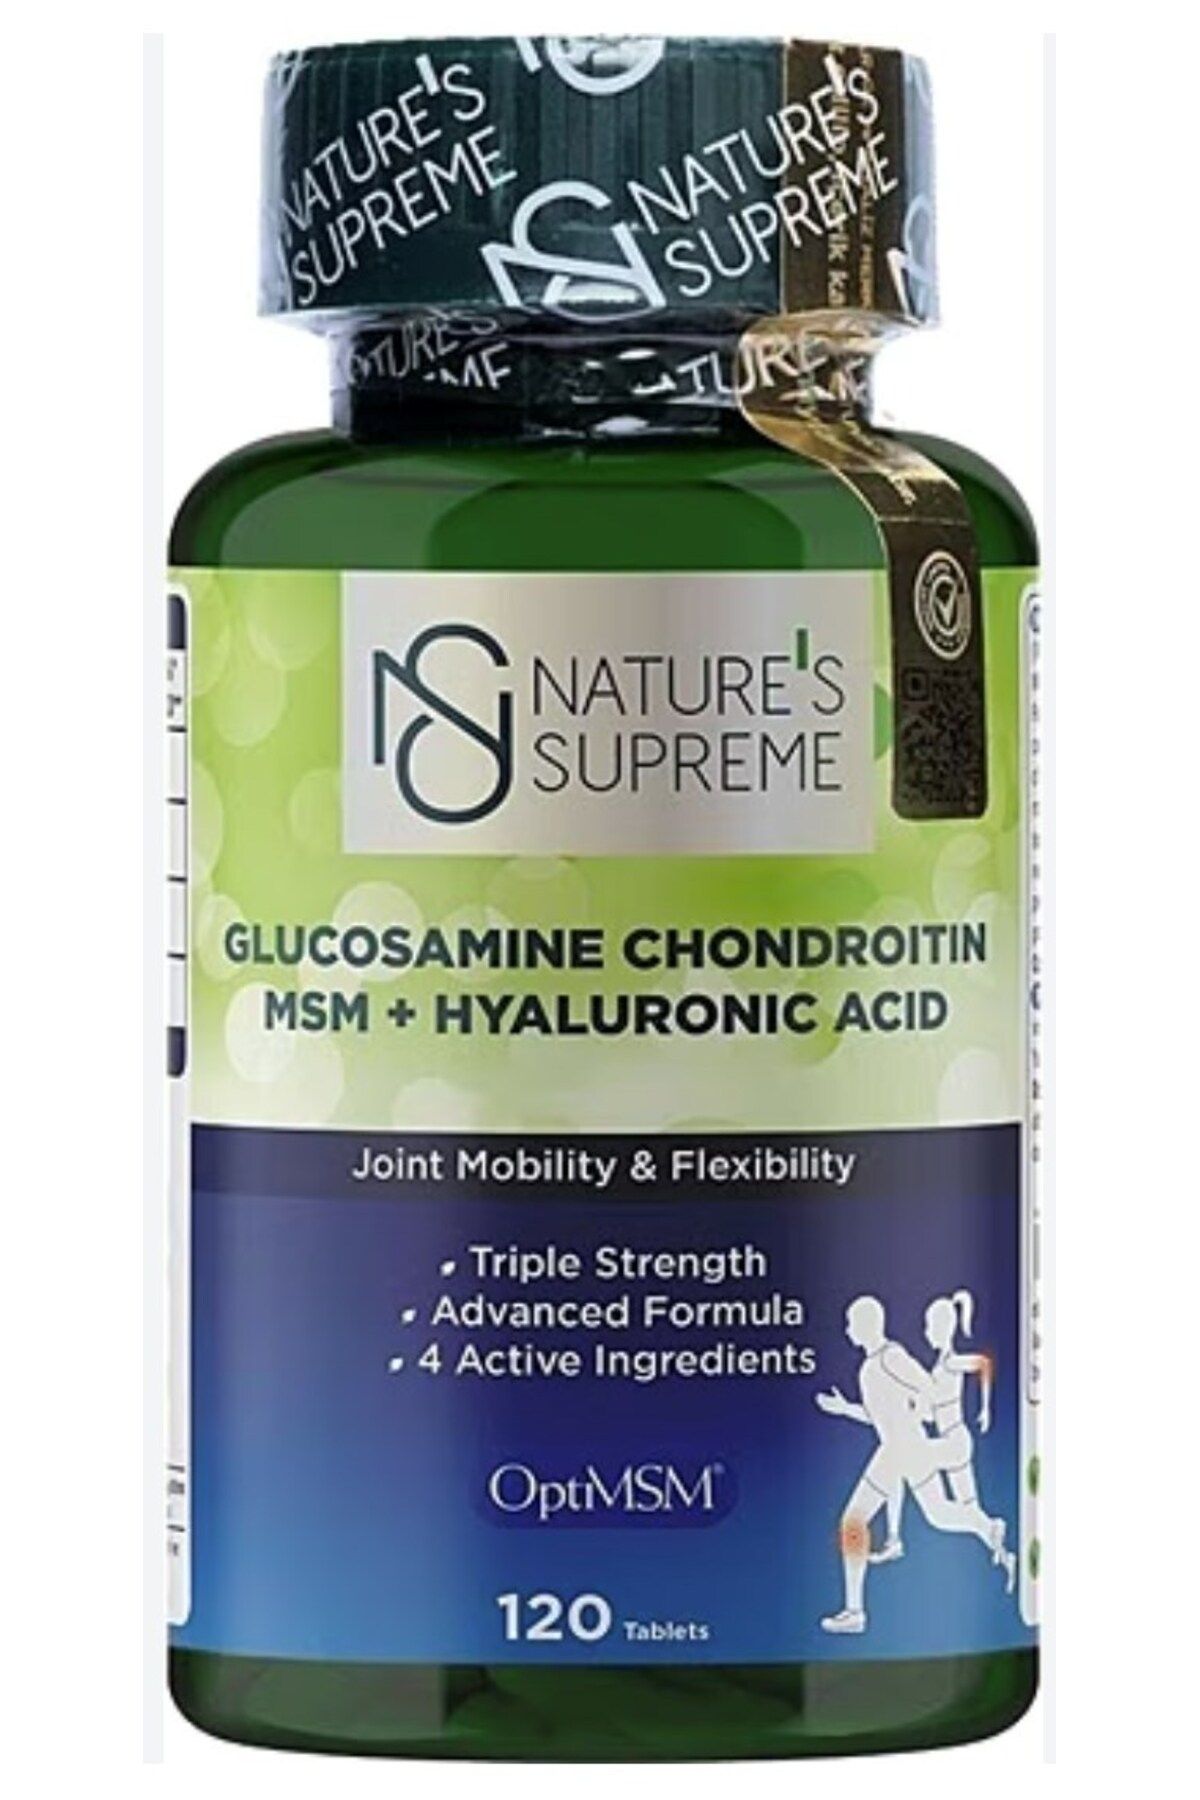 Natures Supreme Glucosamine Chondroitin MSM + Hyaluronic Acid 120 Tablet